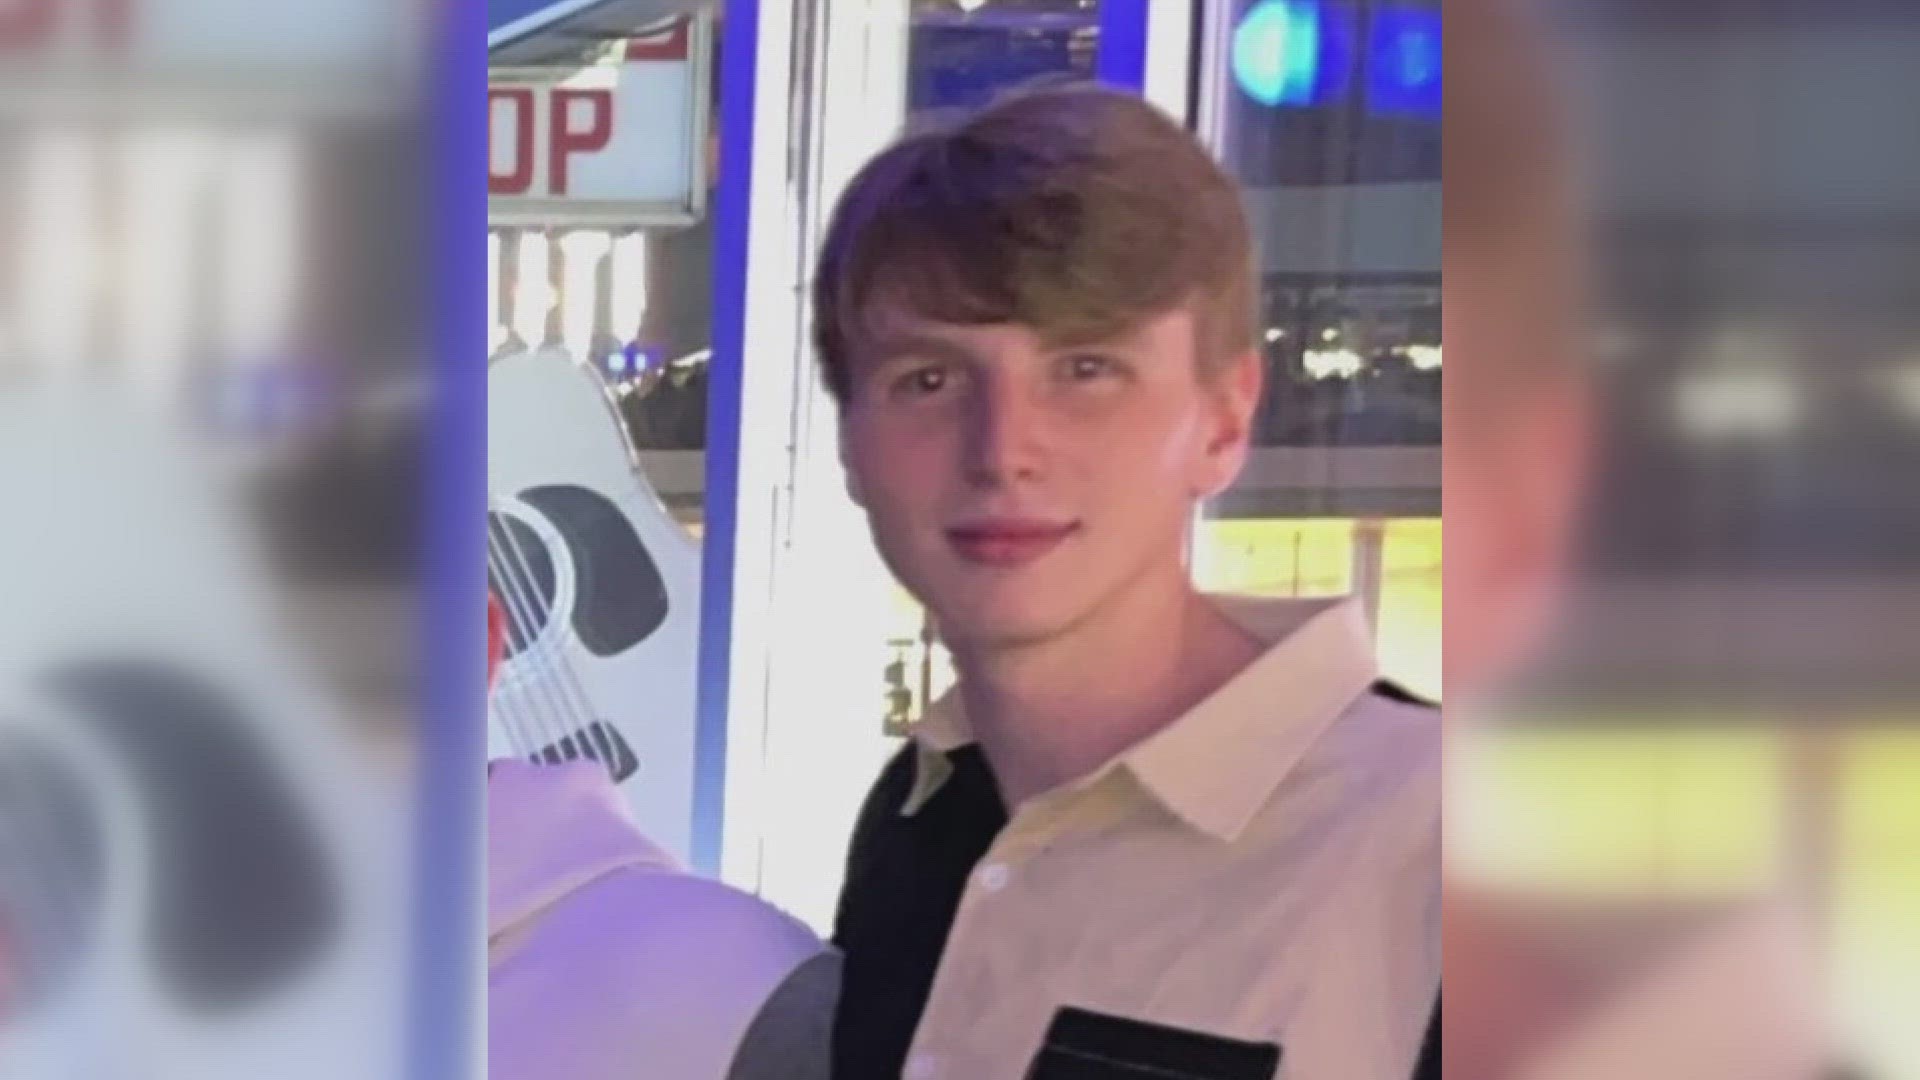 A 22-year-old University of Missouri student is missing after he was asked to leave a Nashville bar Saturday night, the city's police department said.